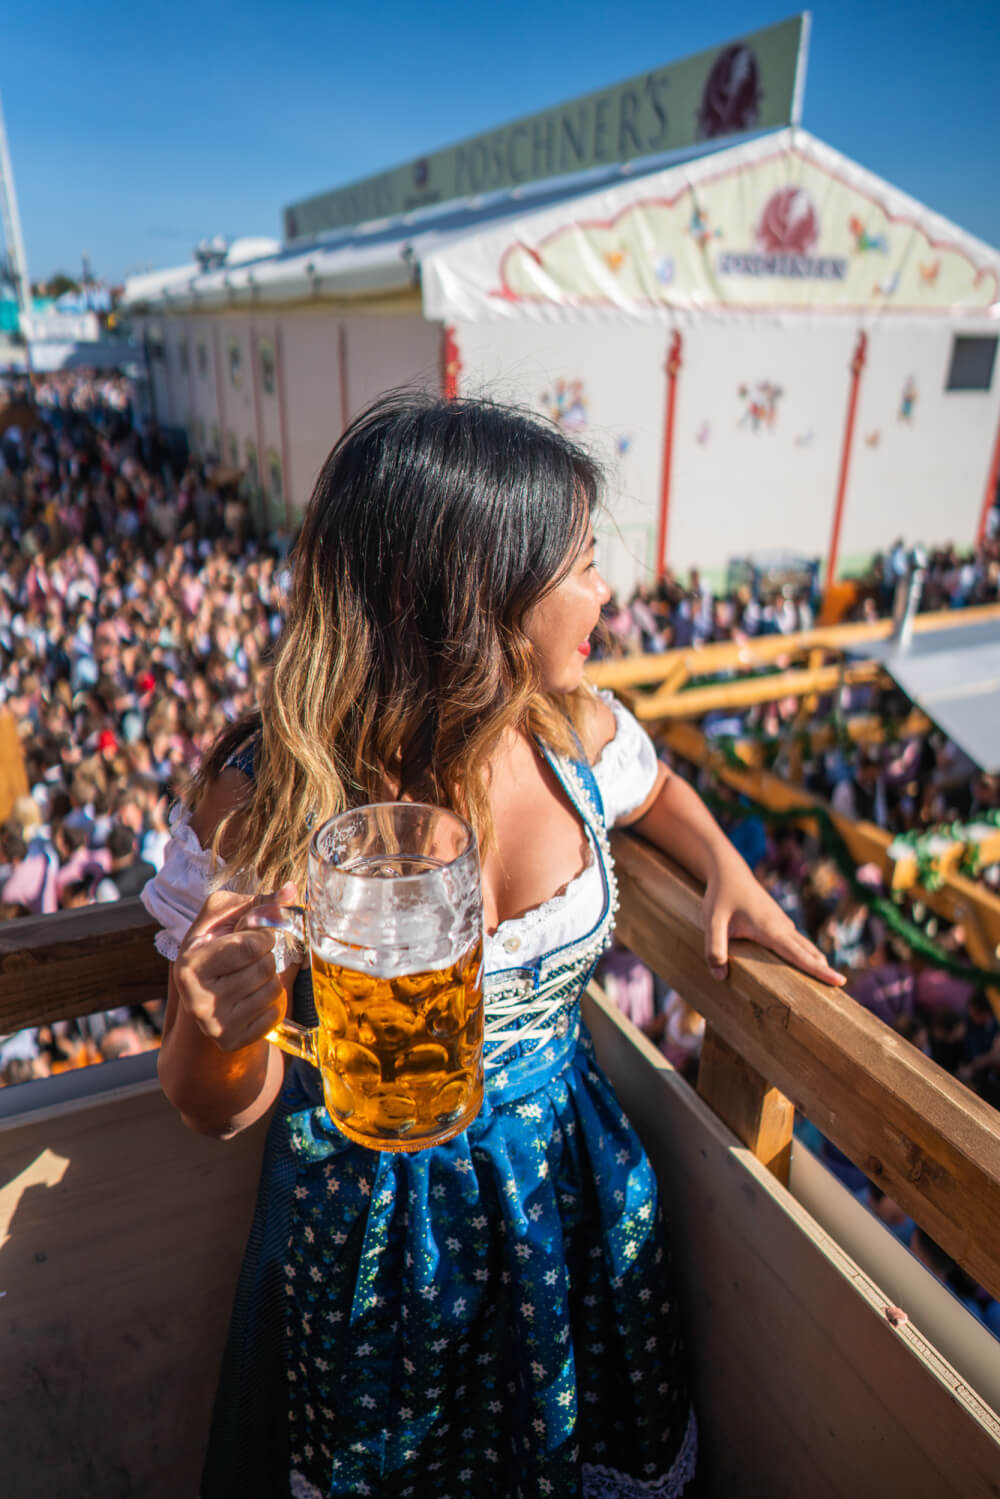 Christina Guan wearing a dirndl and holding a beer at Oktoberfest in Munich, Germany